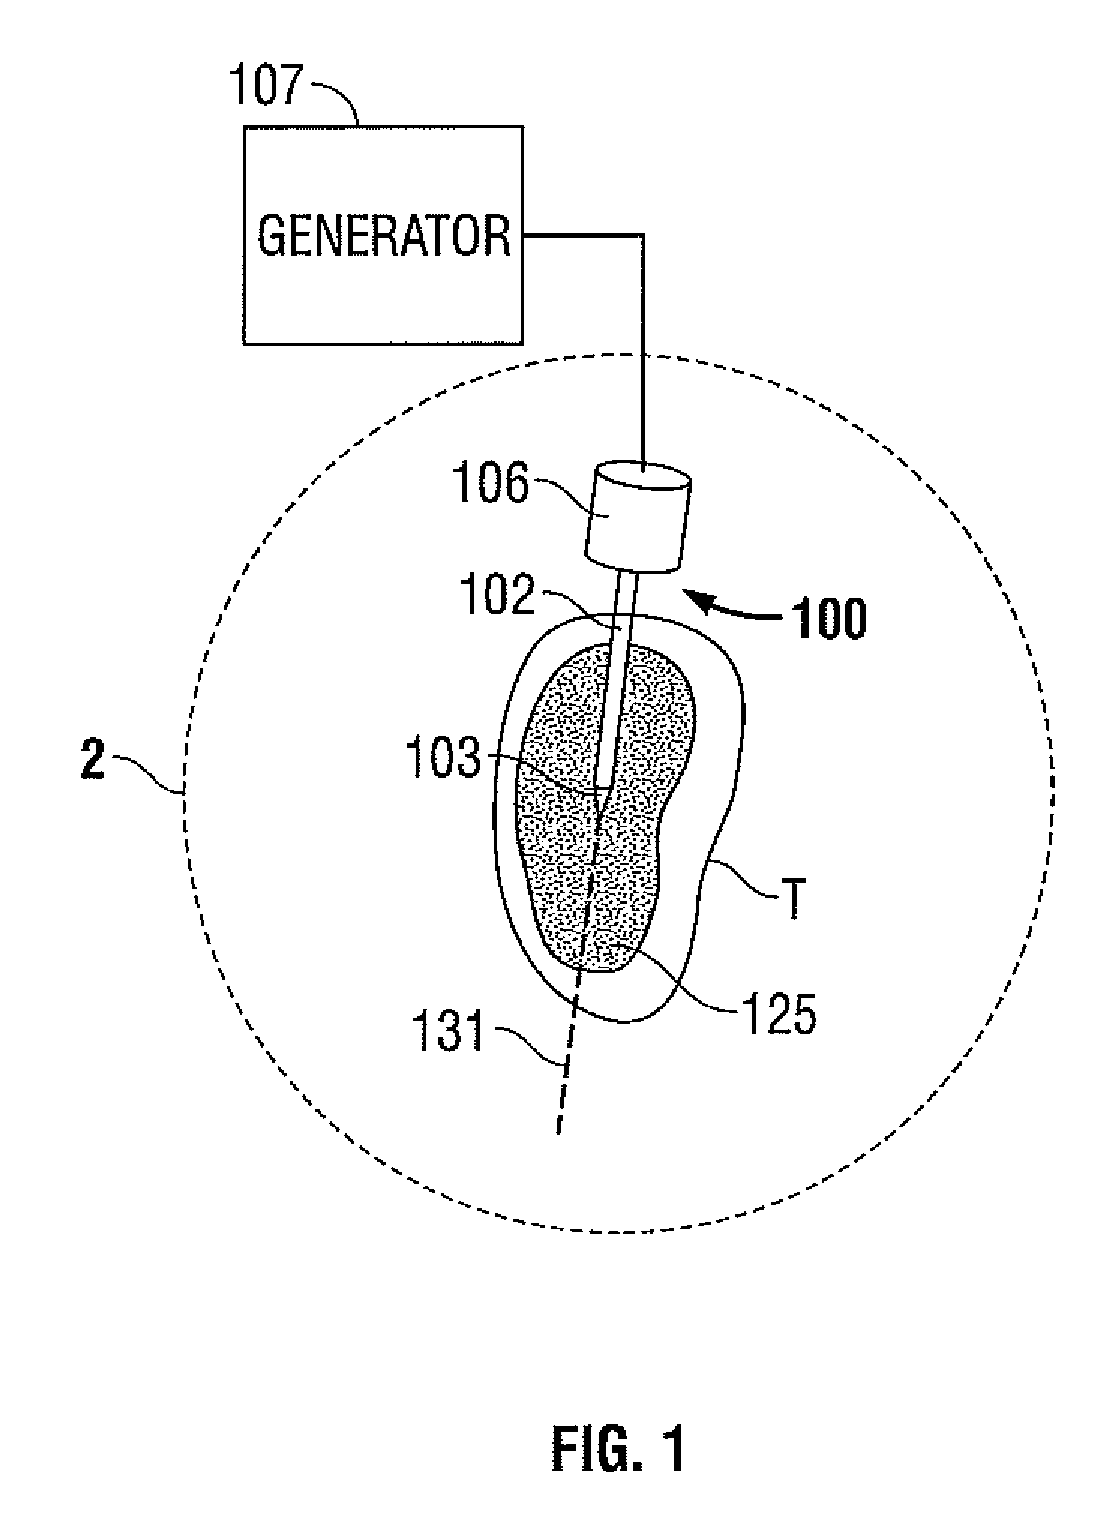 Method for ablation volume determination and geometric reconstruction